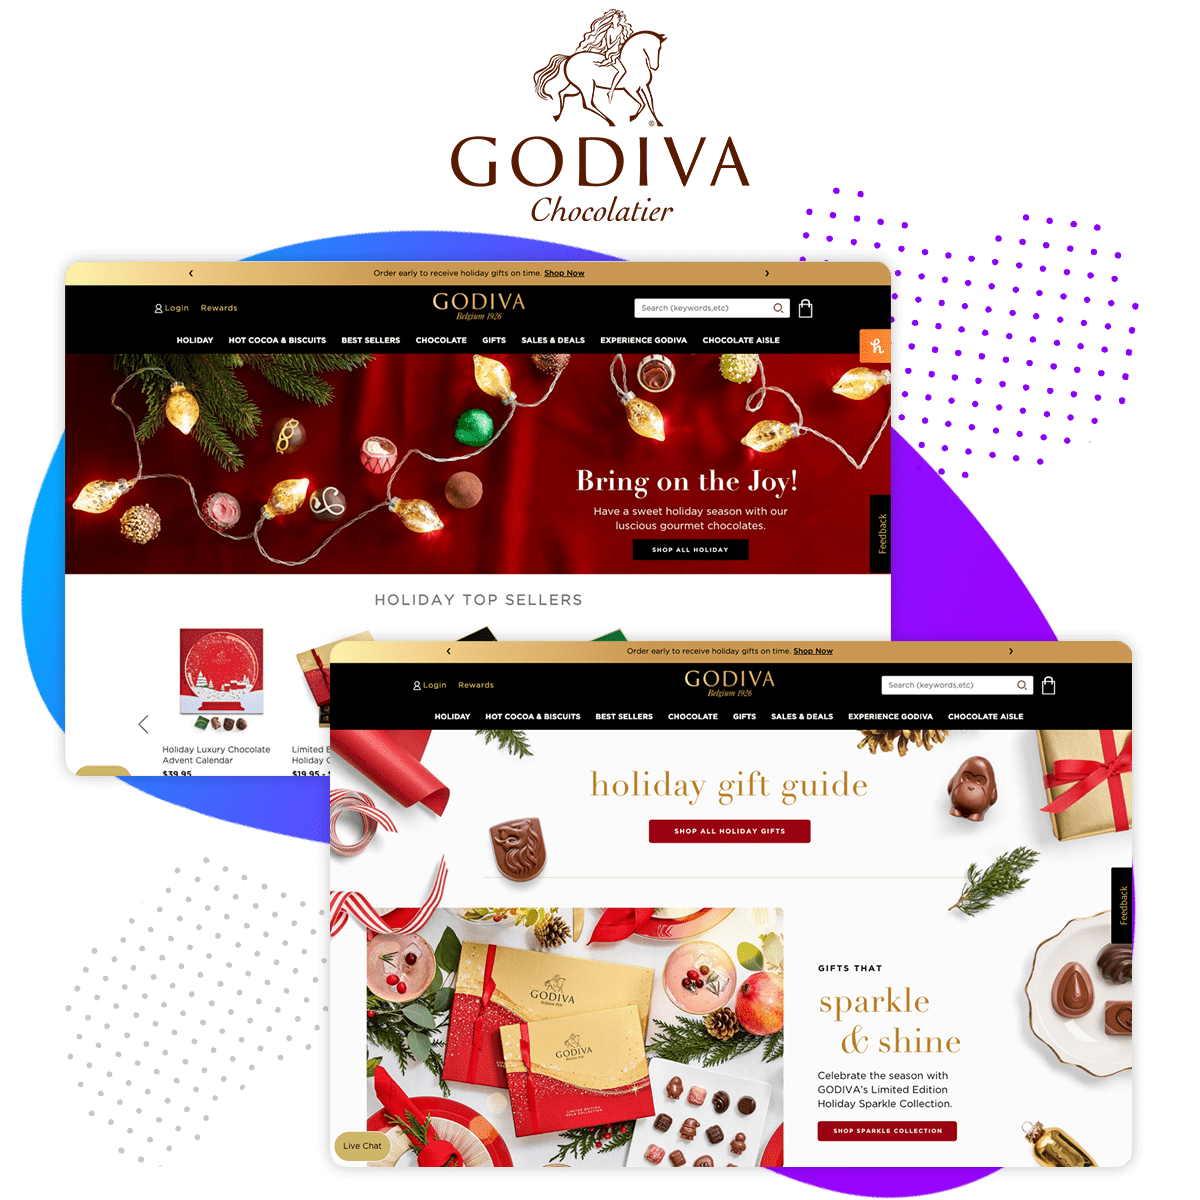 Godiva homepage and gift guide